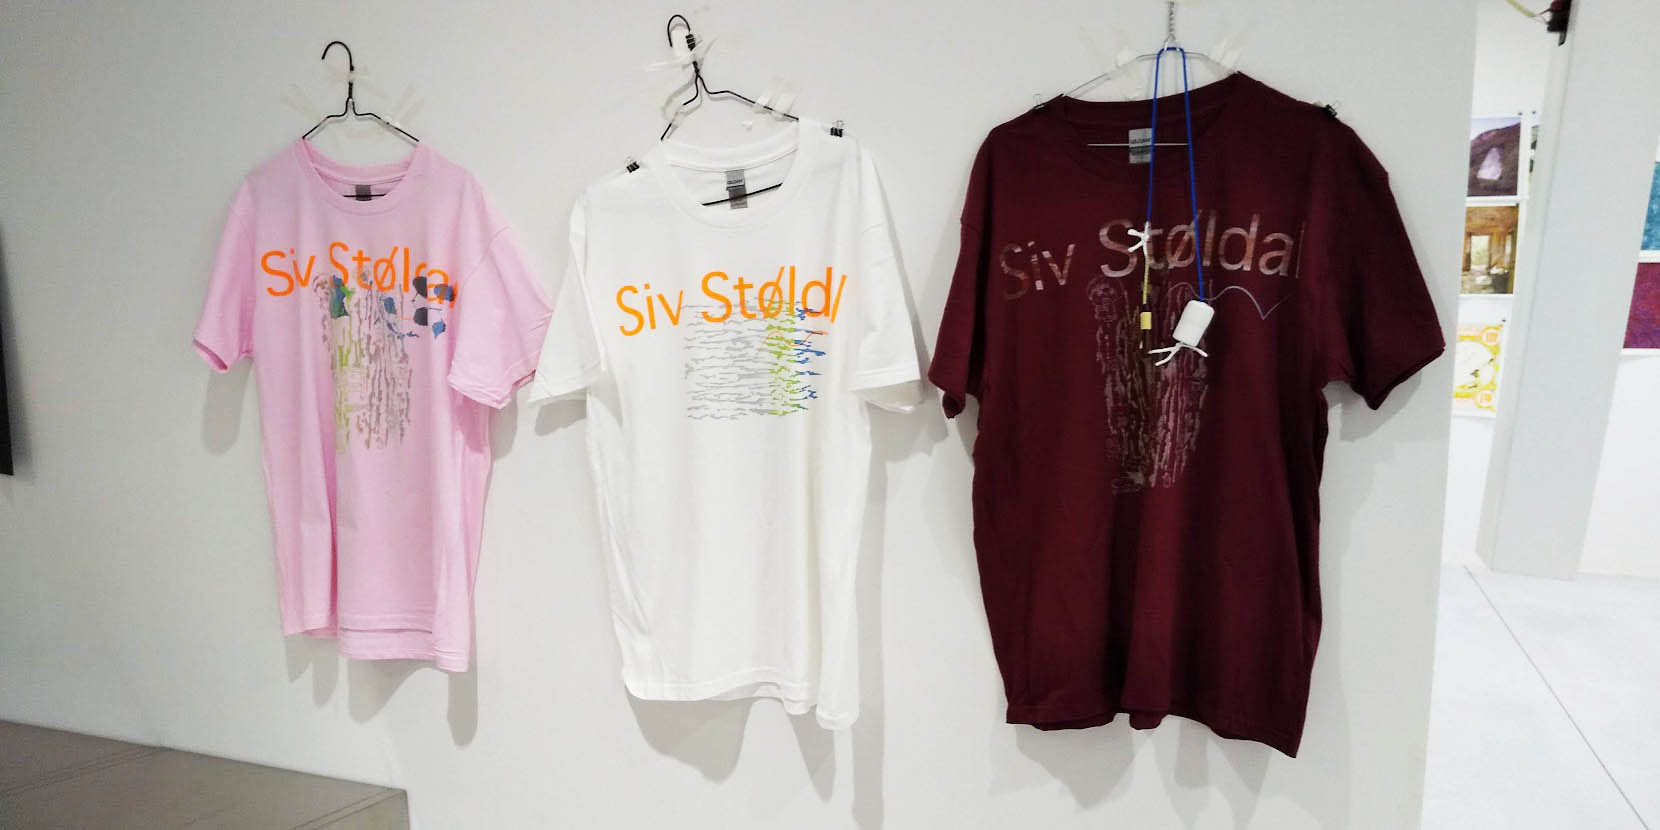 Siv will provide T-shirts in a variety of colors. Samples with original ink are displayed for participants.